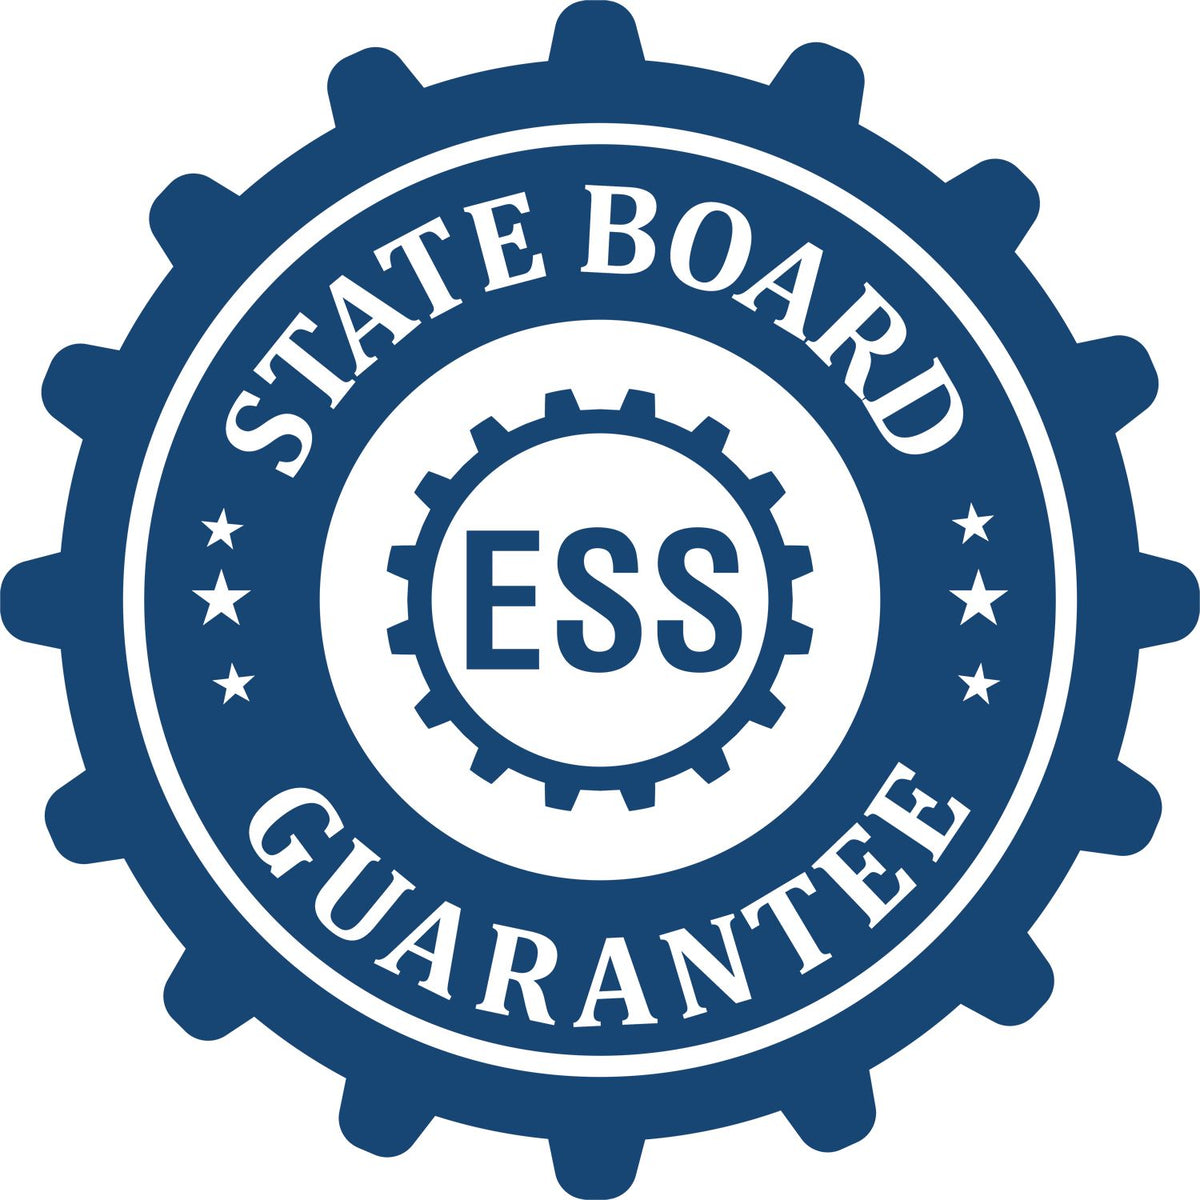 An emblem in a gear shape illustrating a state board guarantee for the State of Louisiana Extended Long Reach Engineer Seal product.